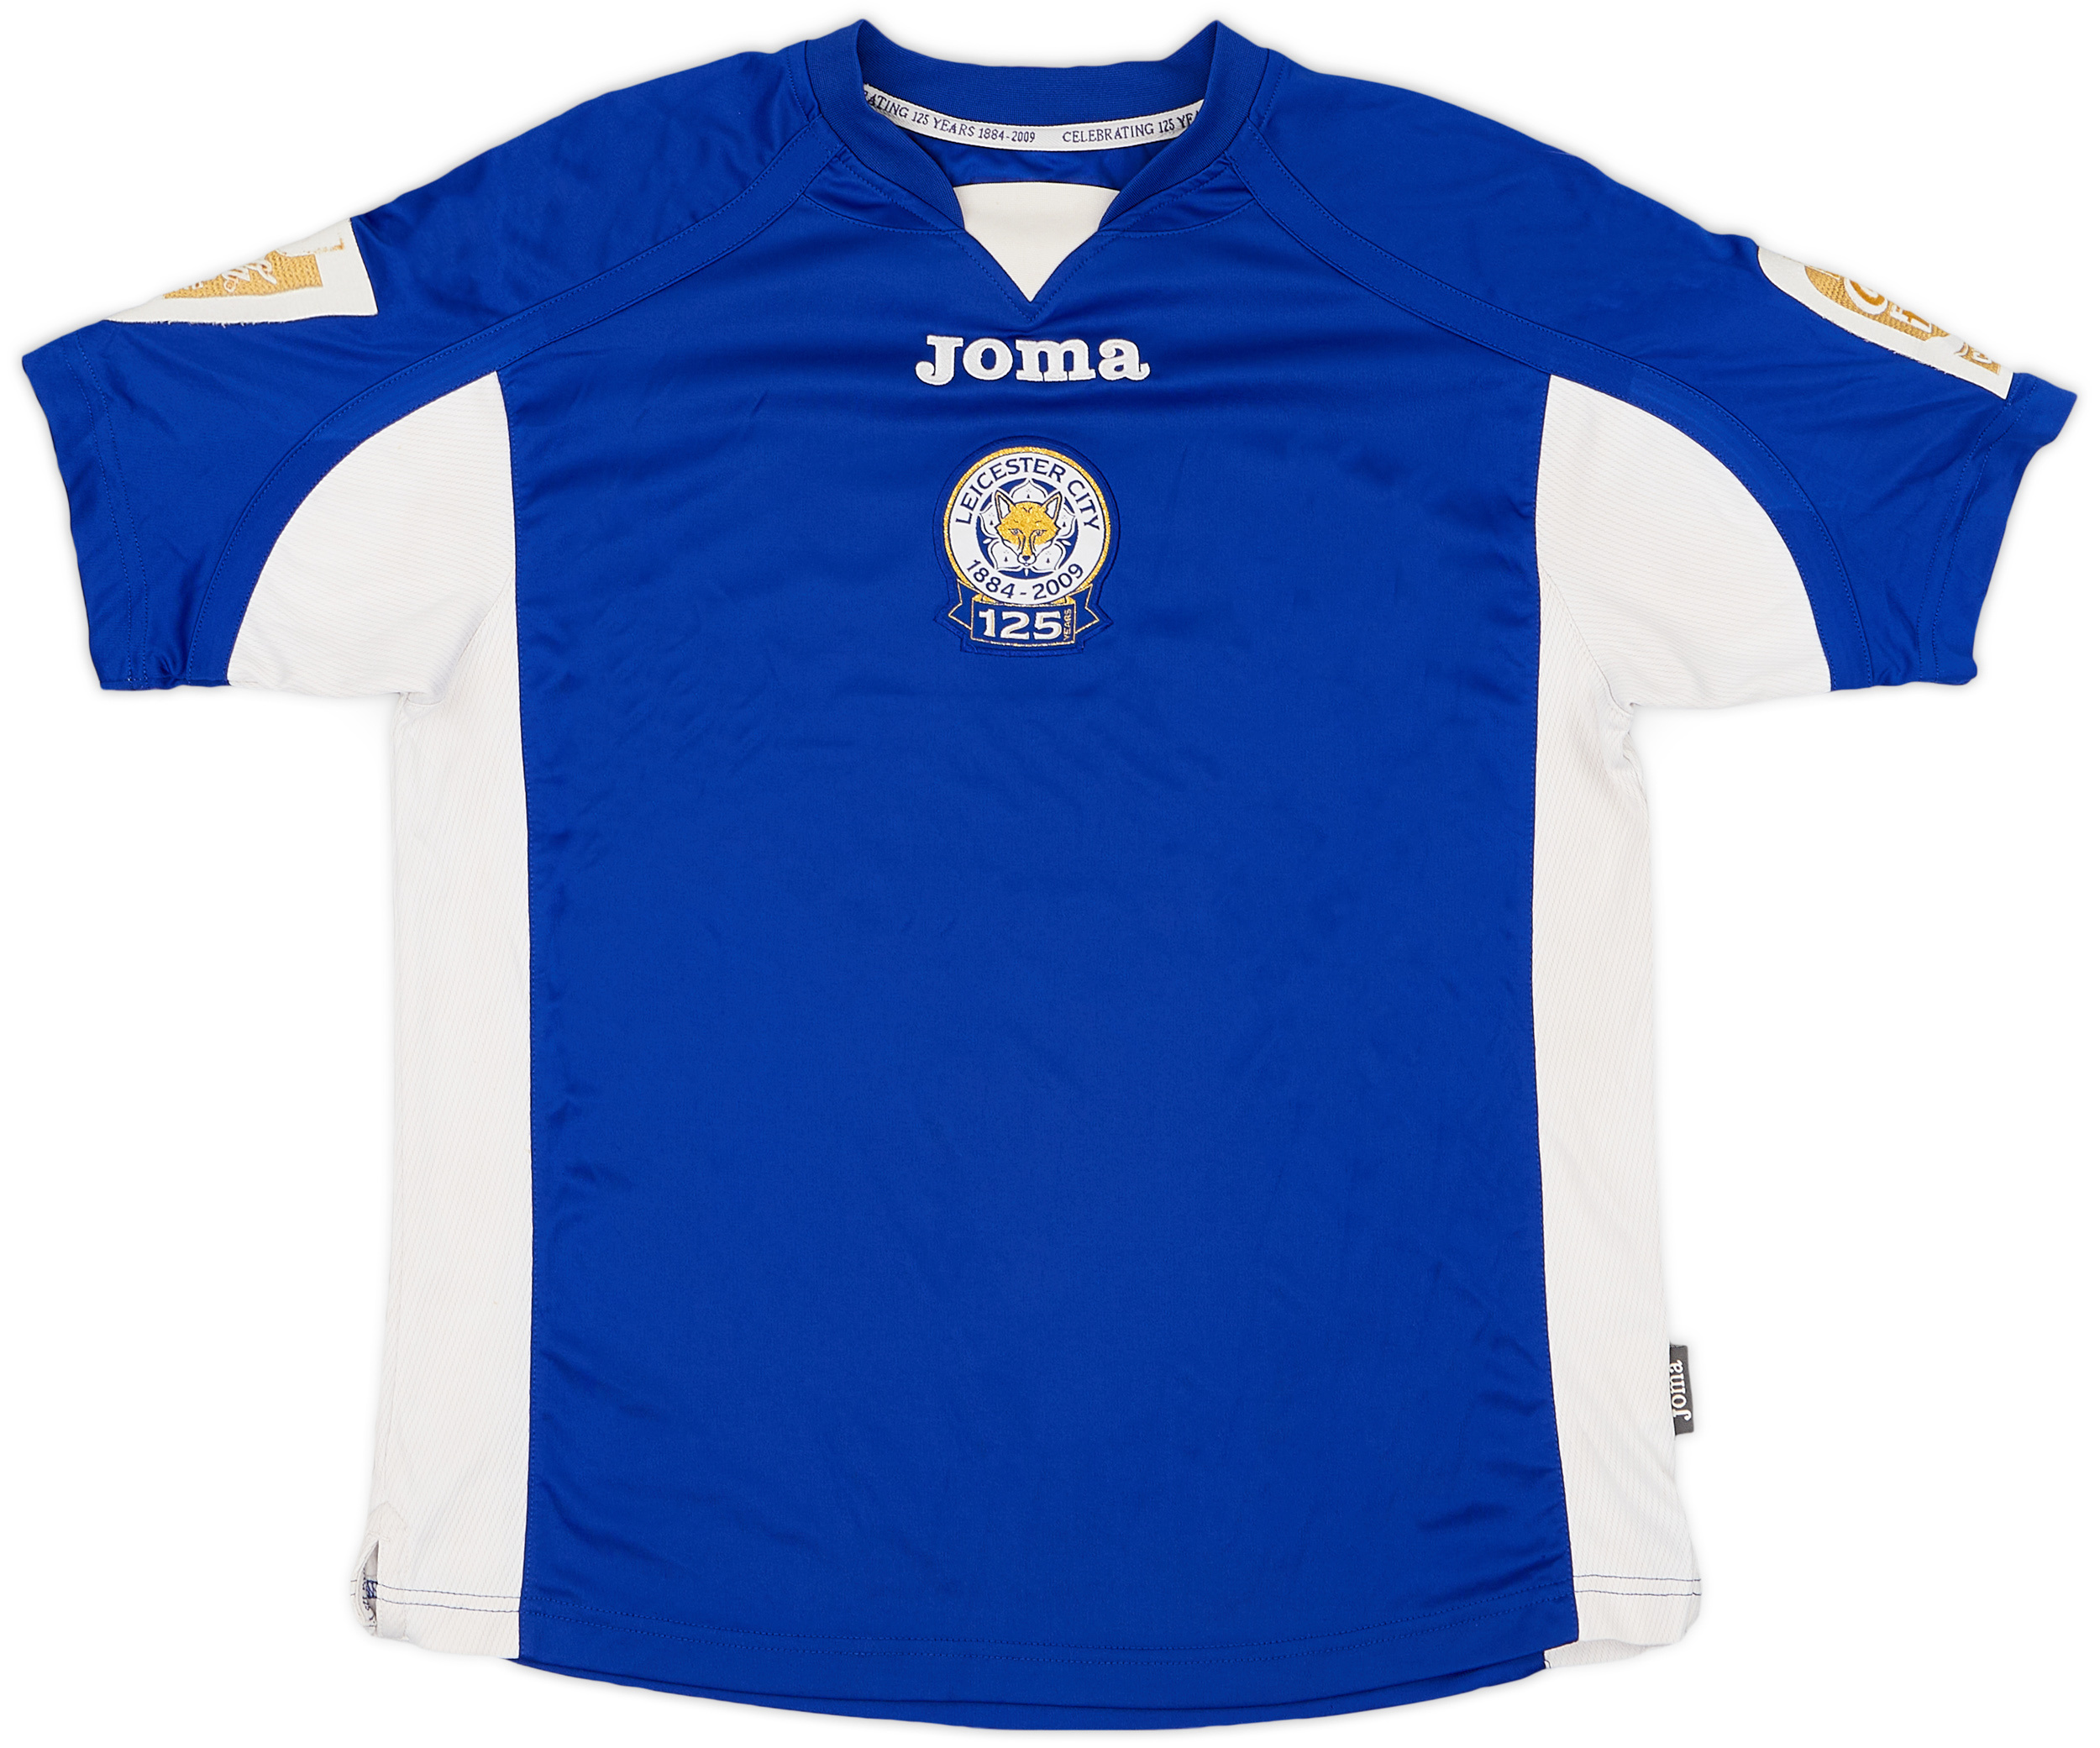 2009-10 Leicester '125 Years' Home Shirt - 6/10 - ()